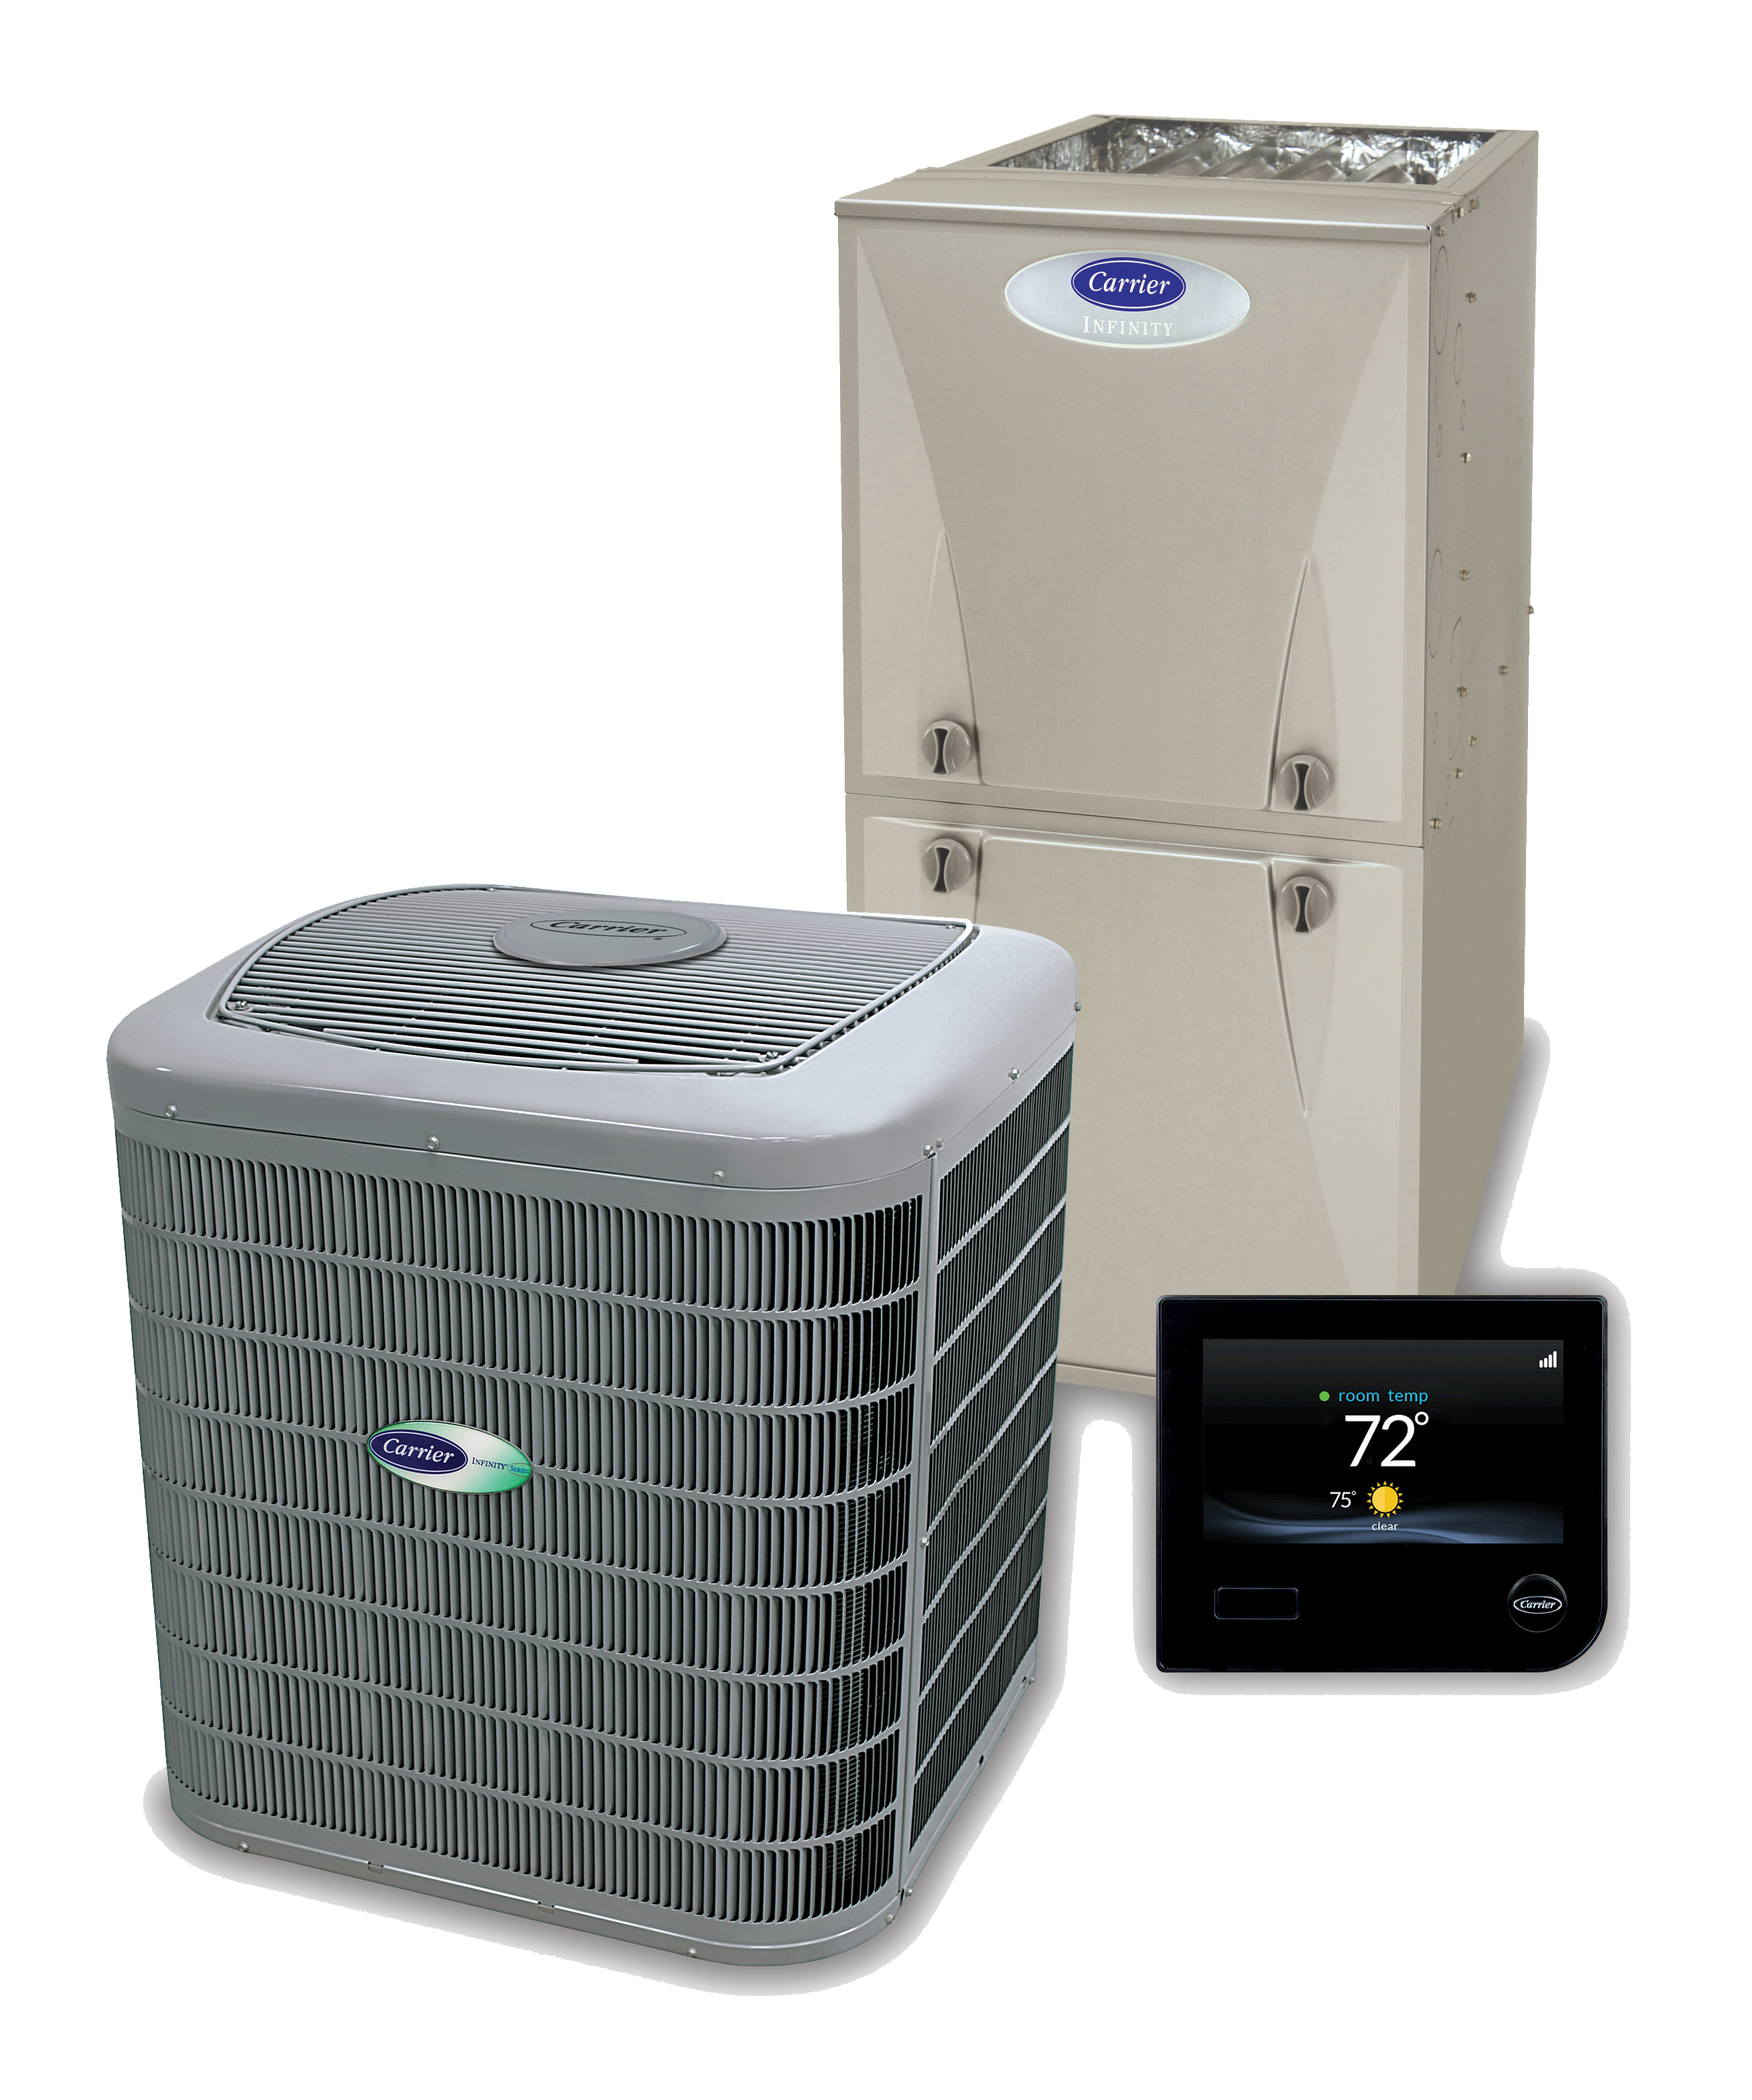 Carrier Infinity Furnace, Air Conditioning and Thermostat